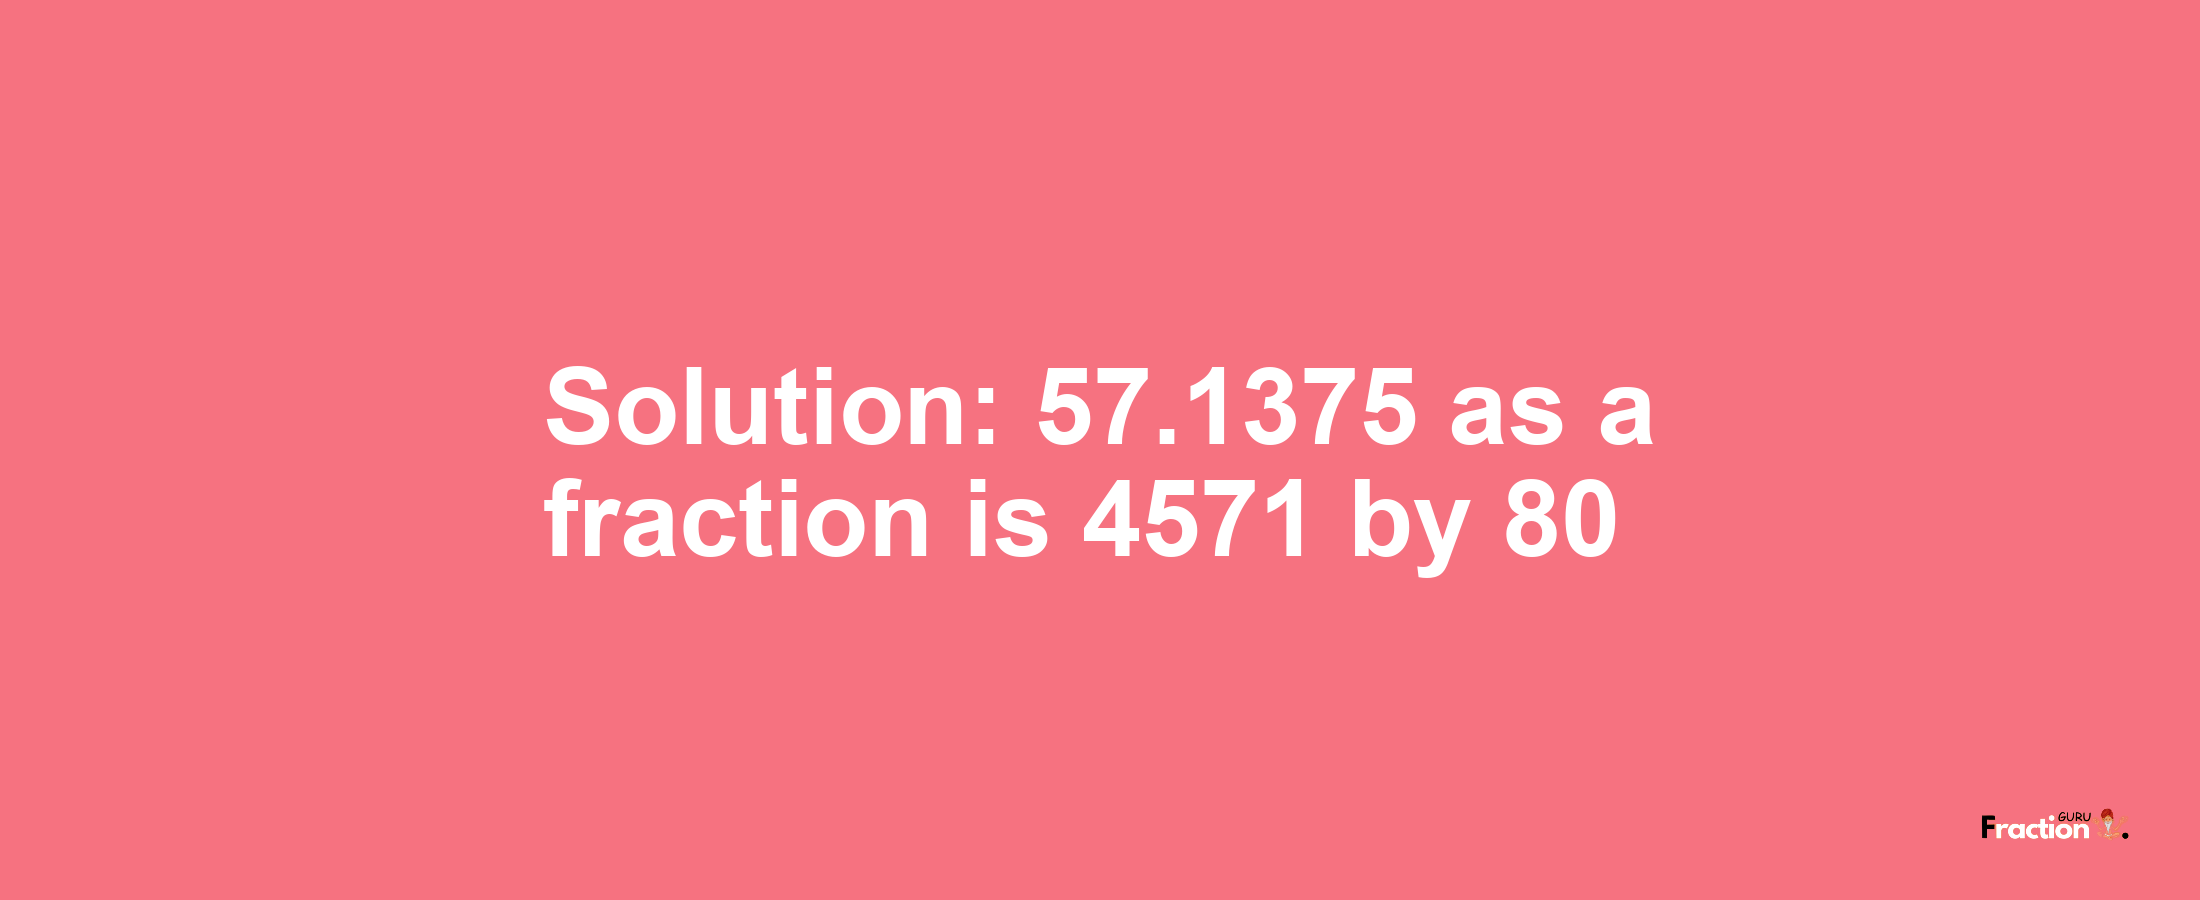 Solution:57.1375 as a fraction is 4571/80